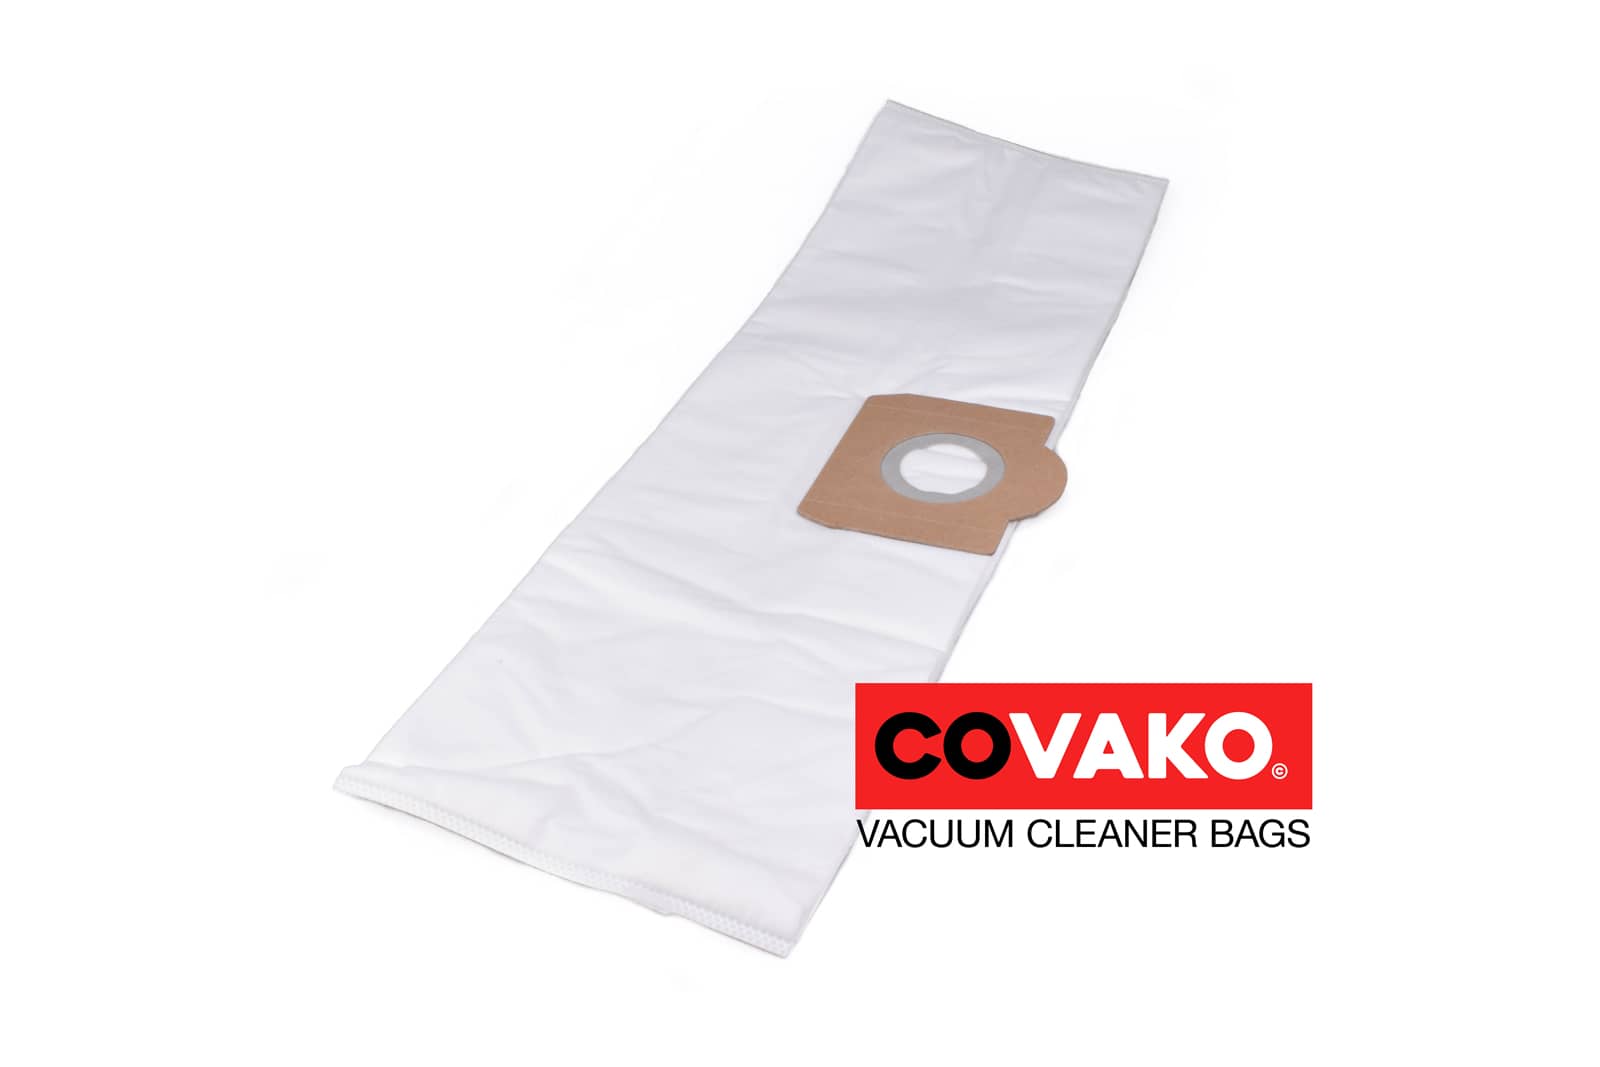 Omega Sirius Serie / Synthesis - Omega vacuum cleaner bags